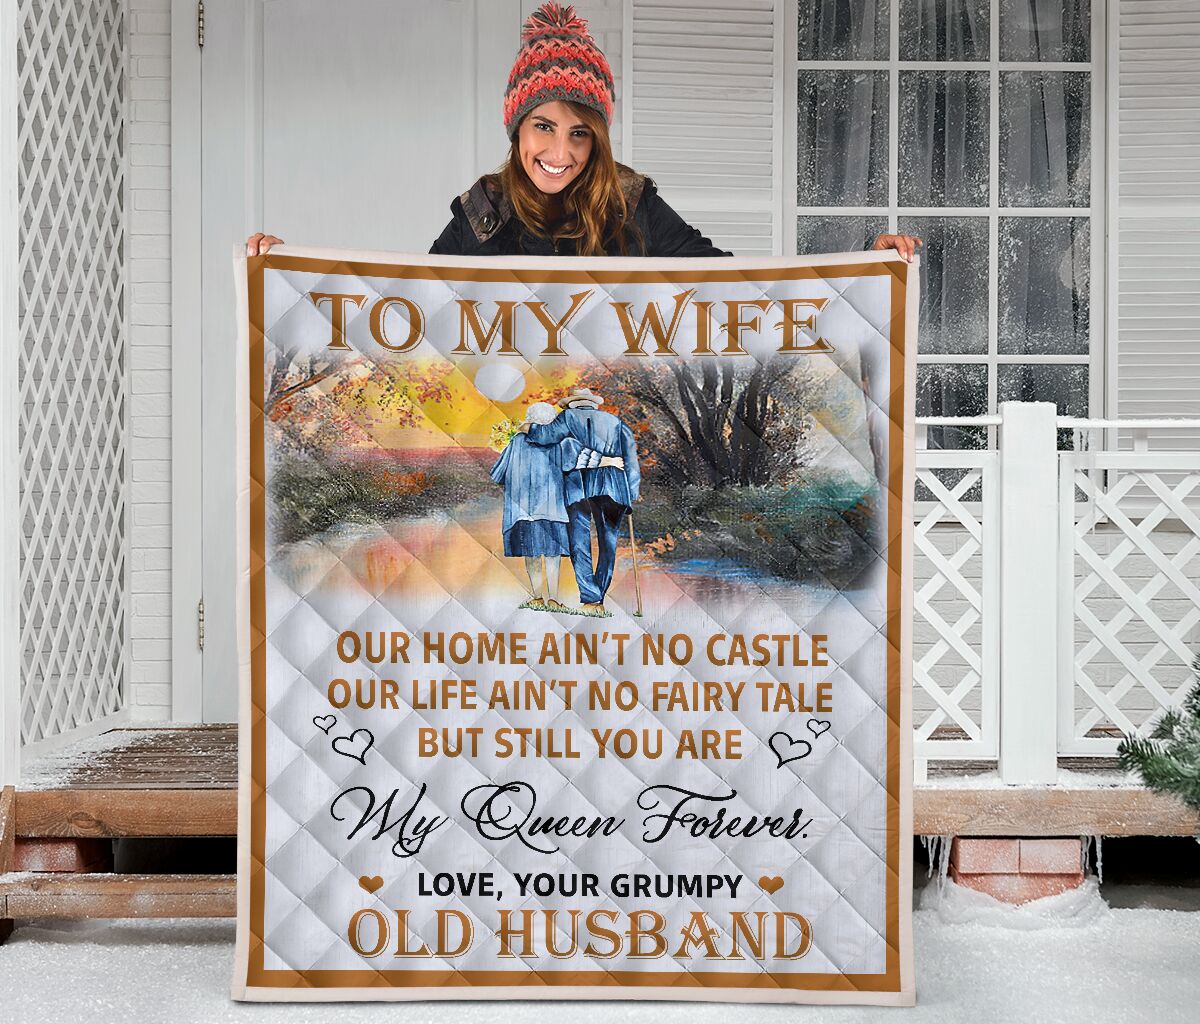 To my wife old husband quilt blanket